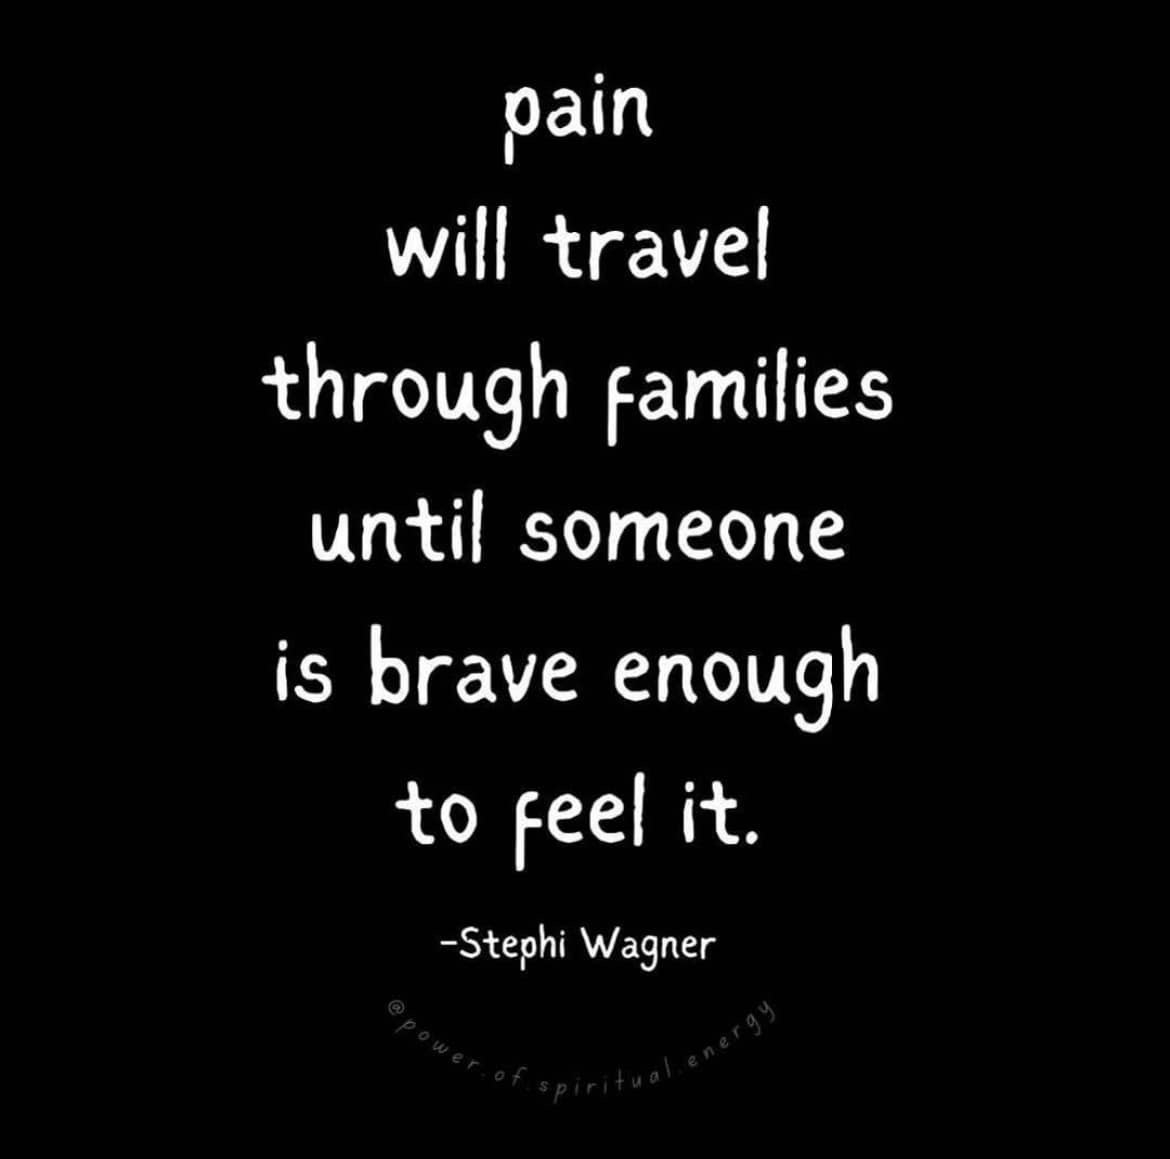 pain will travel through families until someone is brave enough to feel it. Stephi Wagner